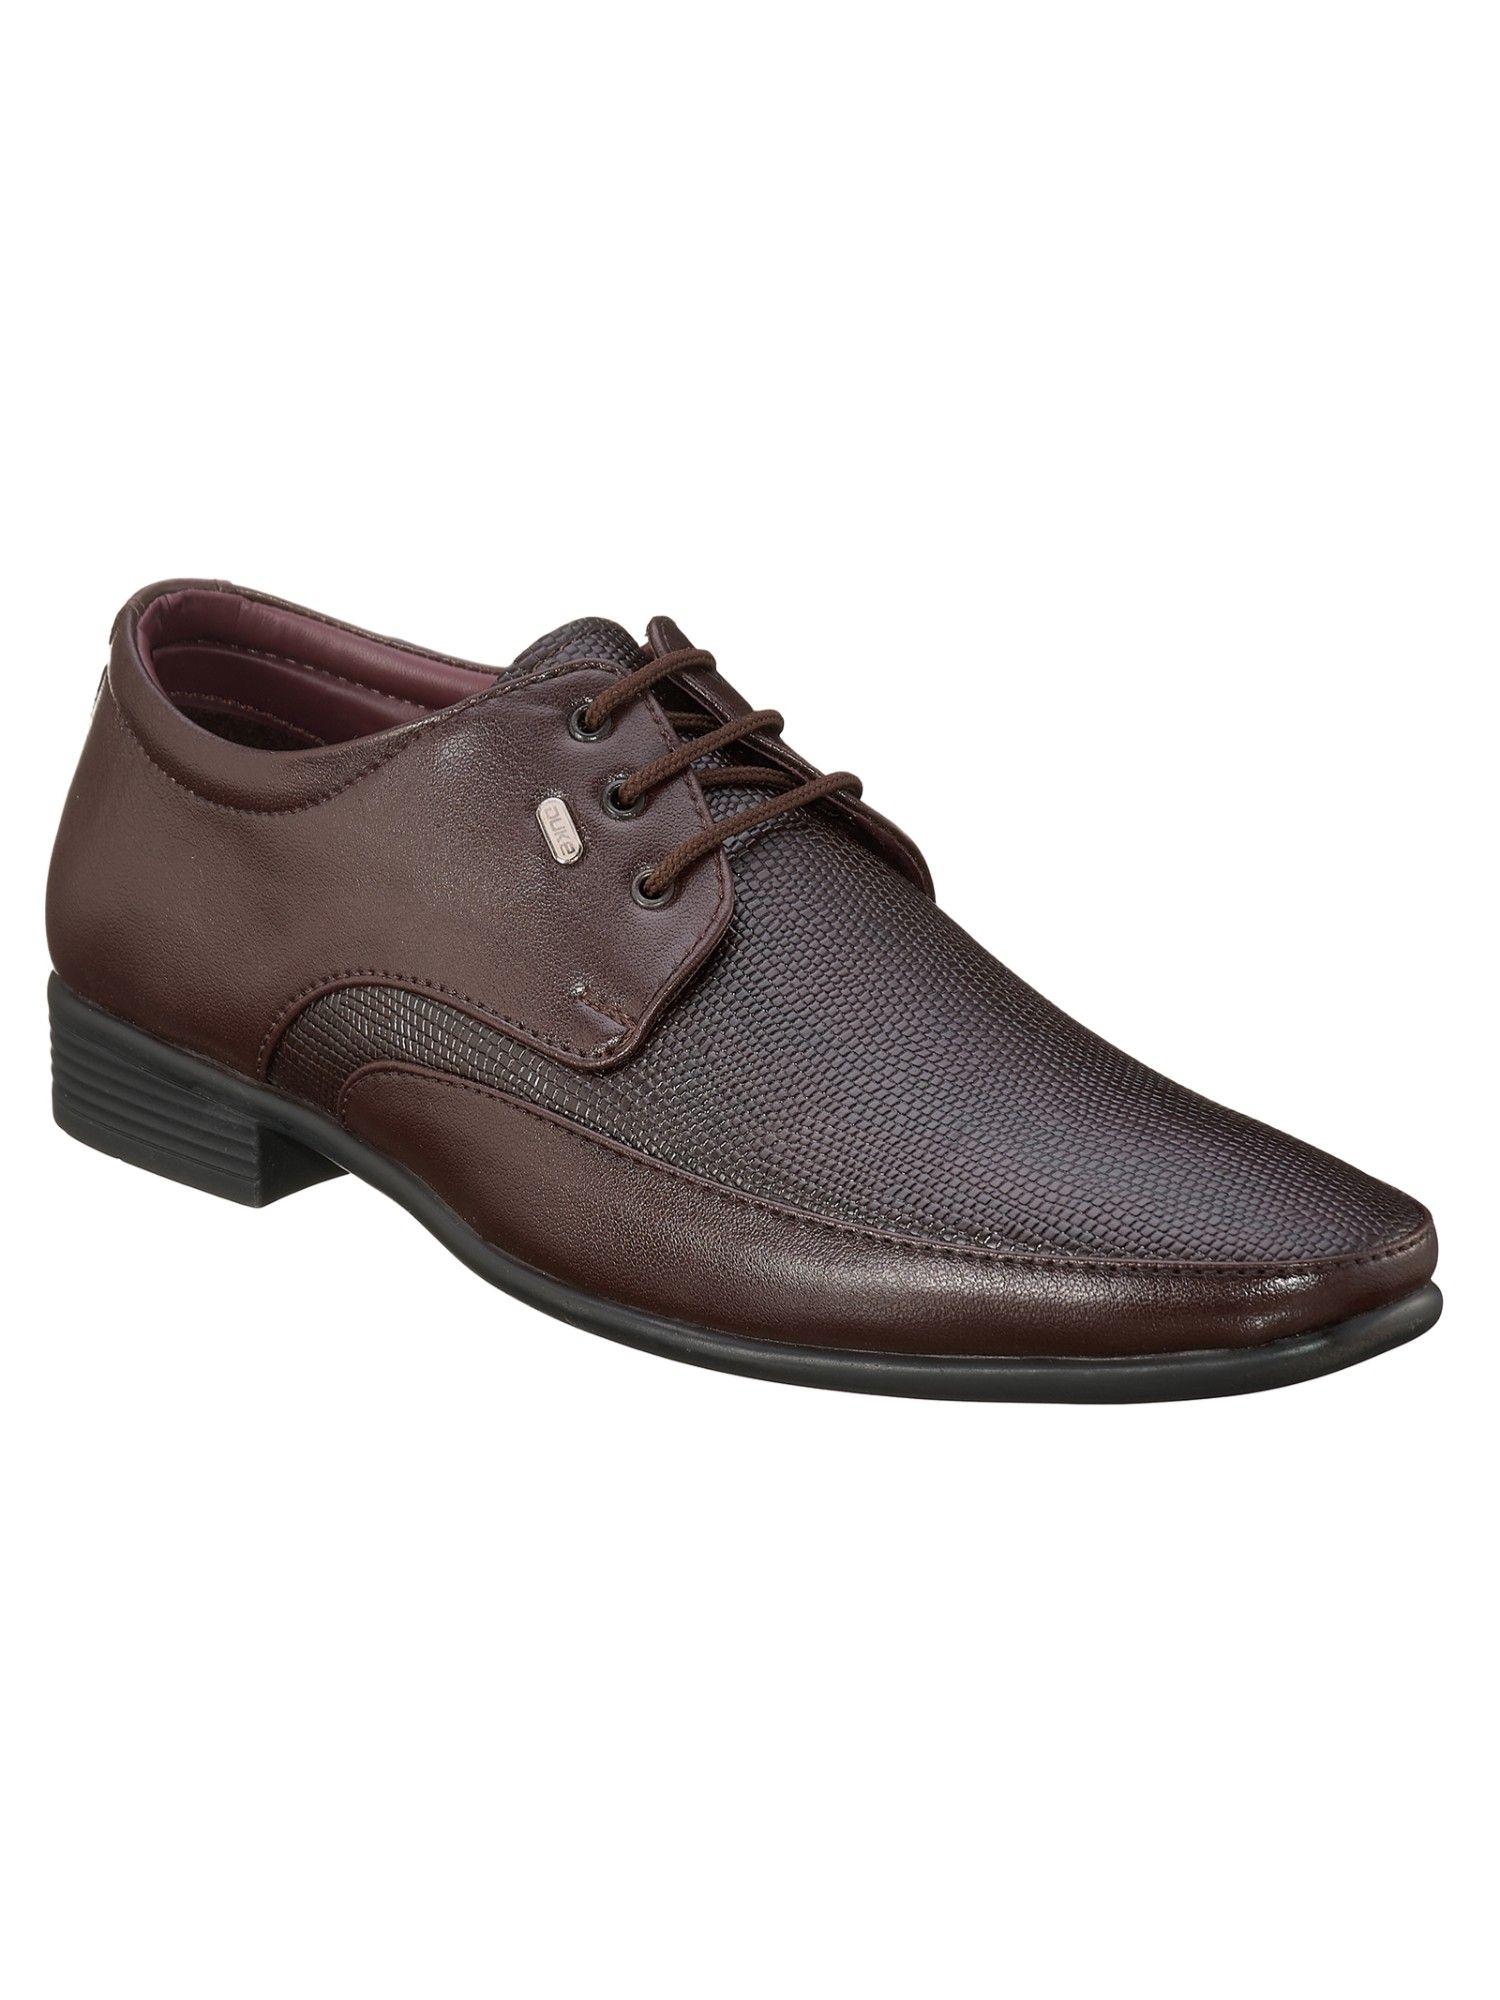 solid/plain-brown-formal-shoes